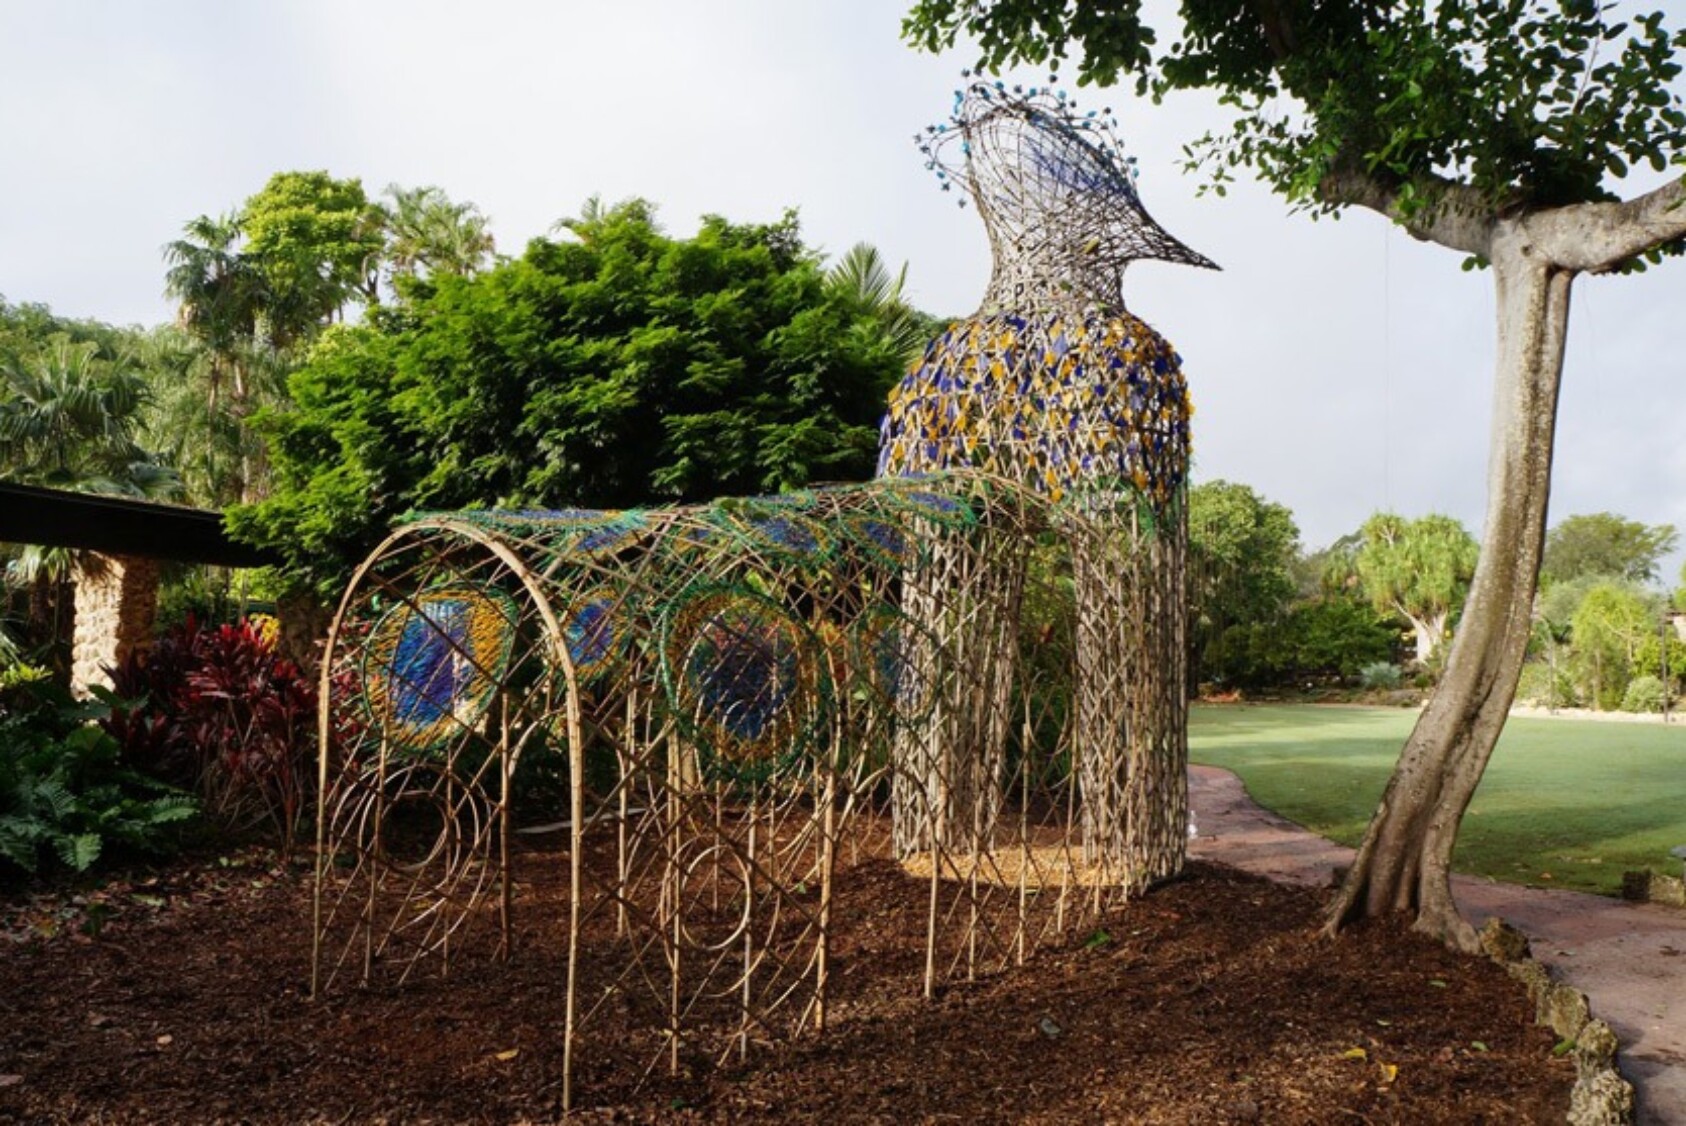 “The Founding Peahen,” a 25-foot-tall peahen, honors Julia DeForest Tuttle, the “Mother of Miami.”